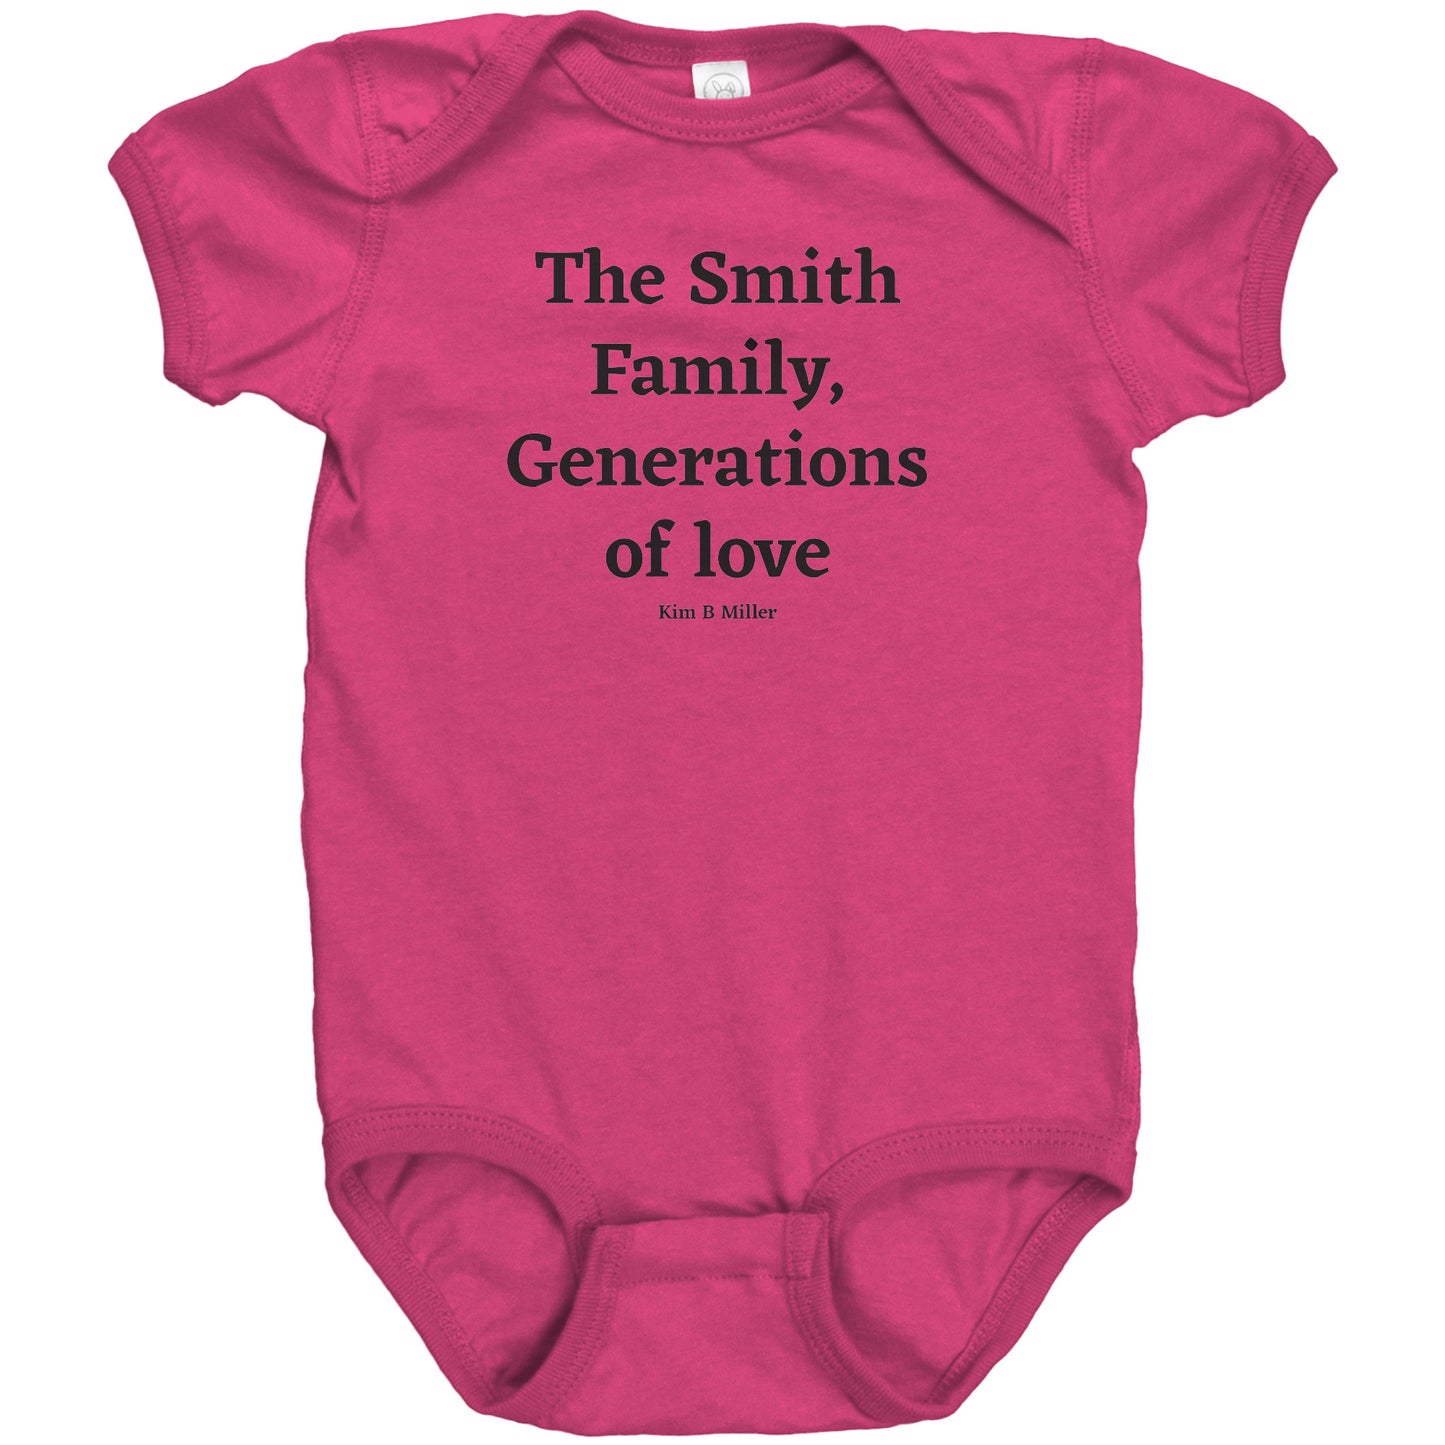 The Smith Family, Generations: RB Baby Bodysuit (Front)